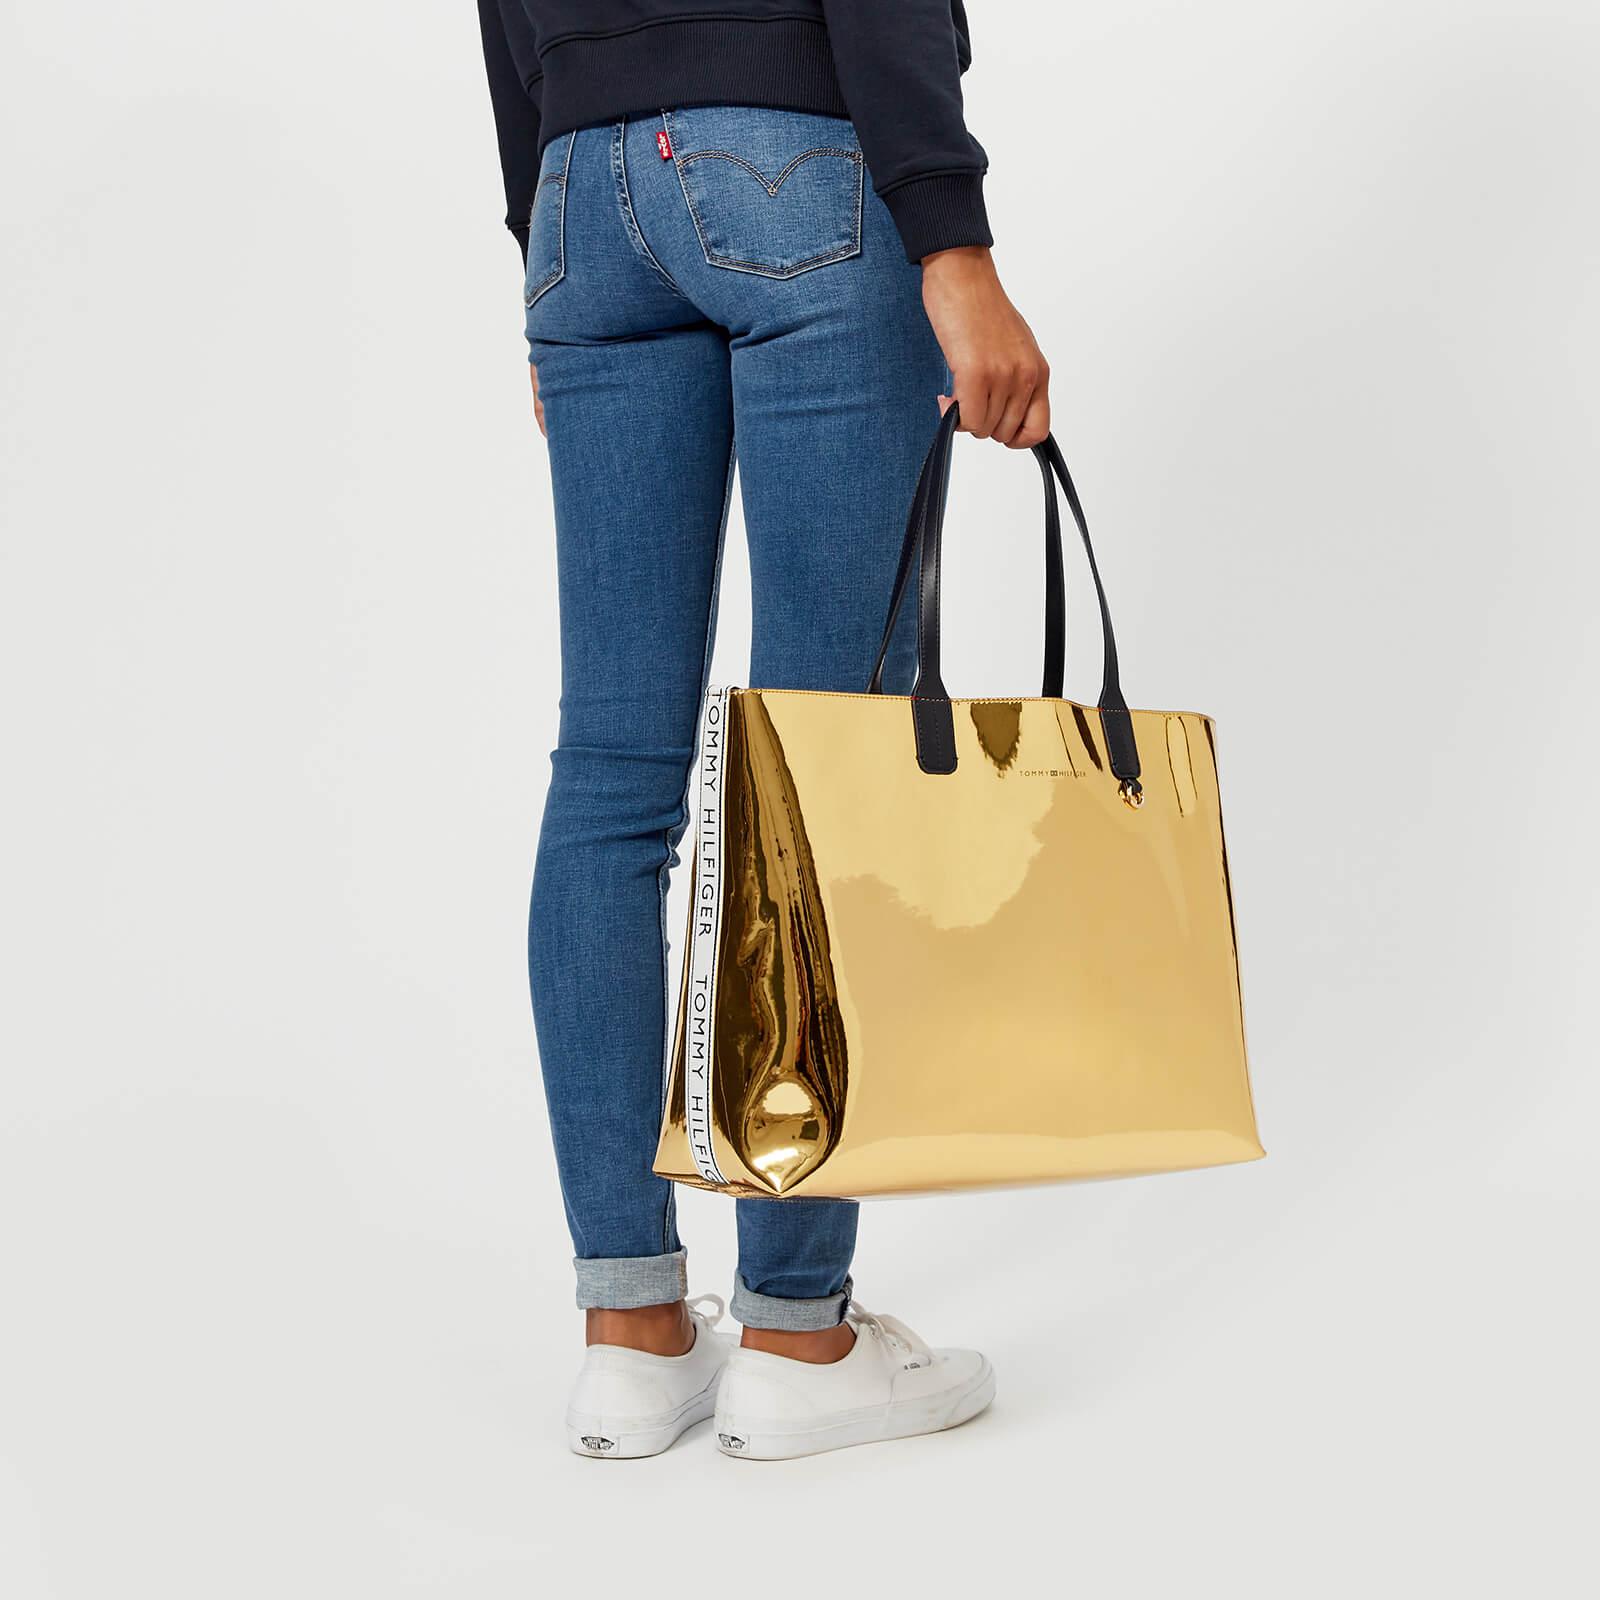 Tommy Hilfiger Iconic Tommy Tote Bag In Metallic Lyst